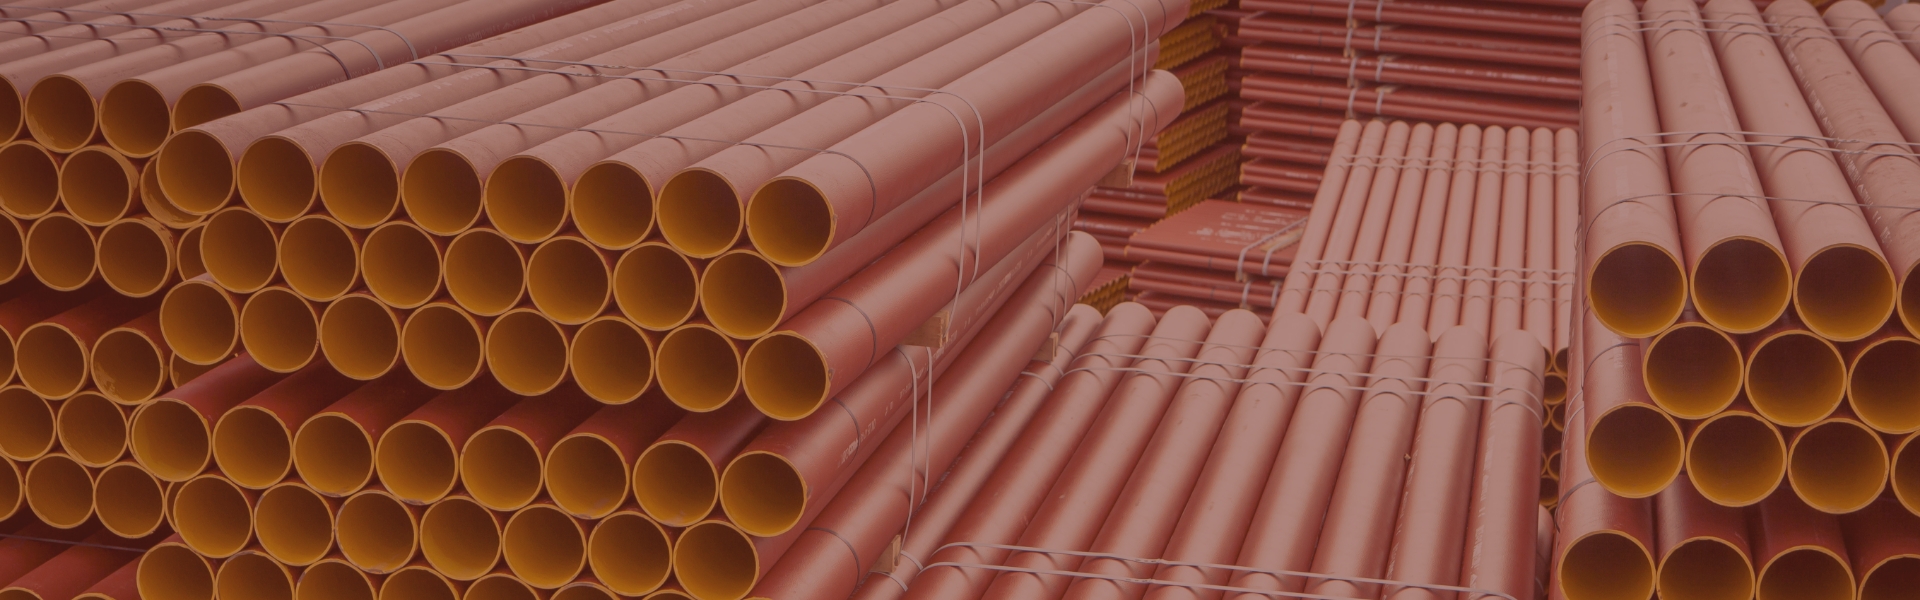 Stacked cast iron pipes